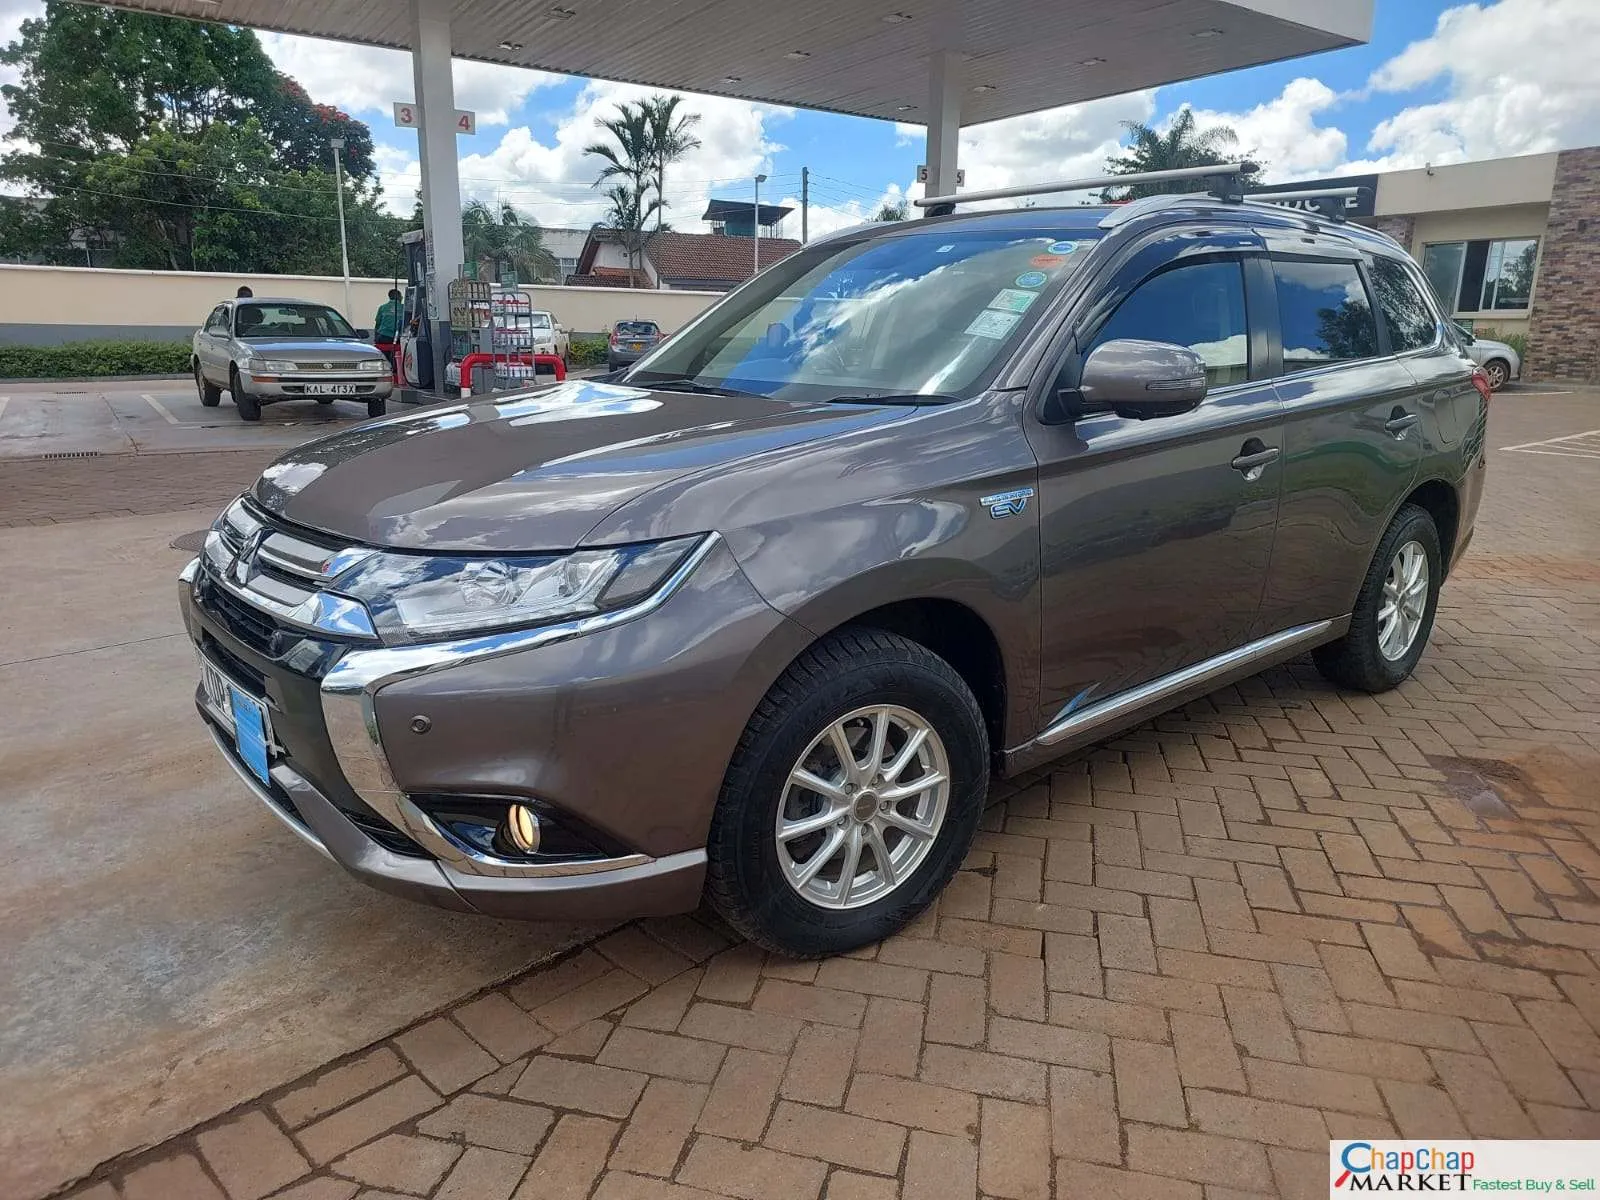 Mitsubishi OUTLANDER PHEV Just ARRIVED 🤩 You Pay 30% Deposit Trade in Ok EXCLUSIVE 2017